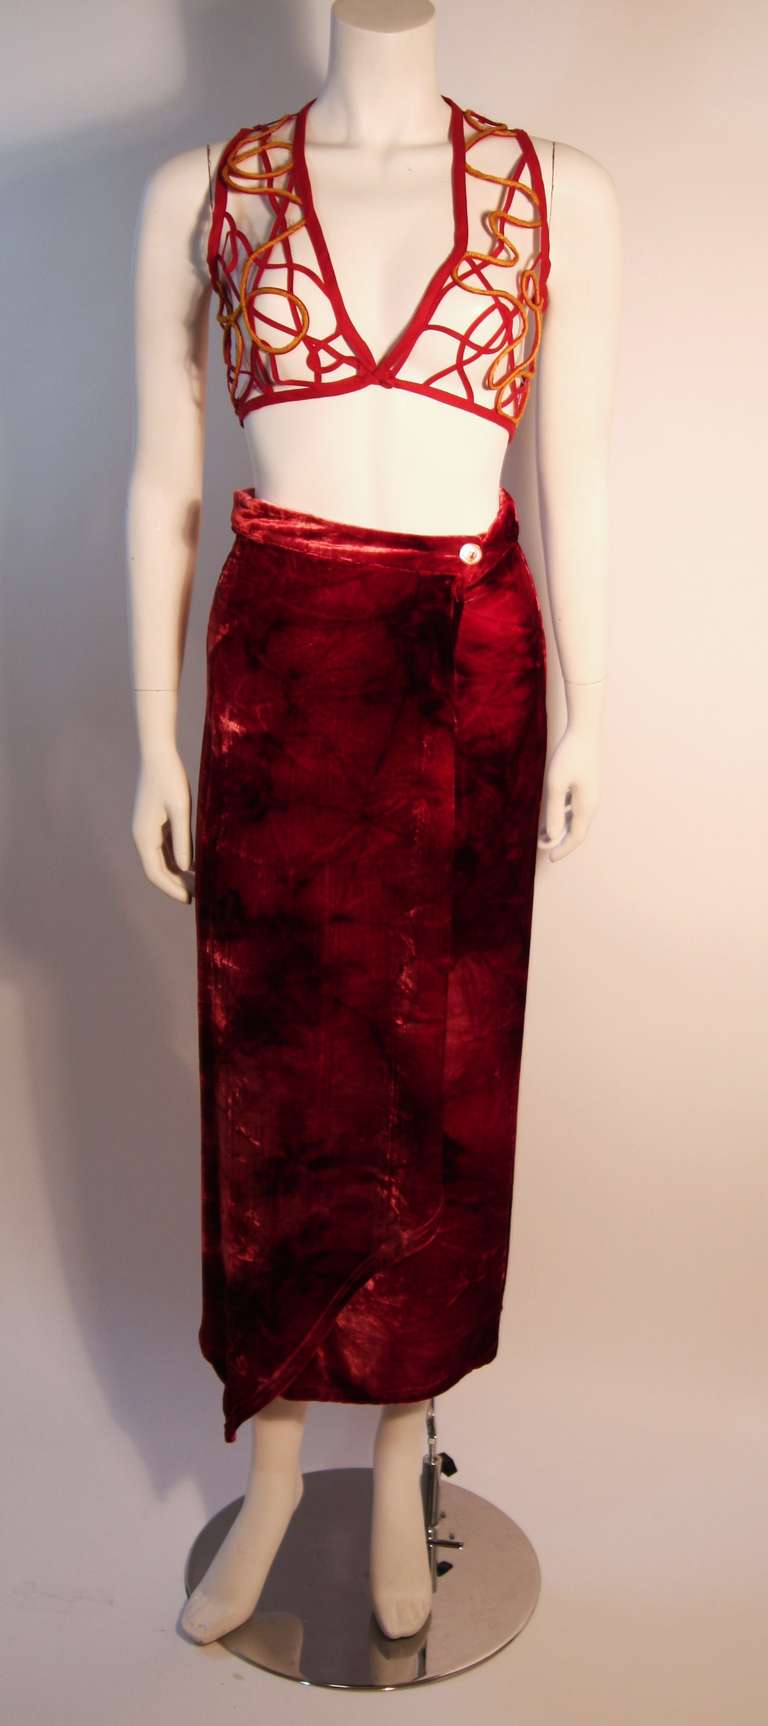 This Ozbek crushed velvet set is very fun. It is a variation of orange and red hues, the red bolero vest has a yellow yarn detail, and the skirt features a wrap detail closure. 

Measurements (Approximate):
Skirt 
Waist: 25